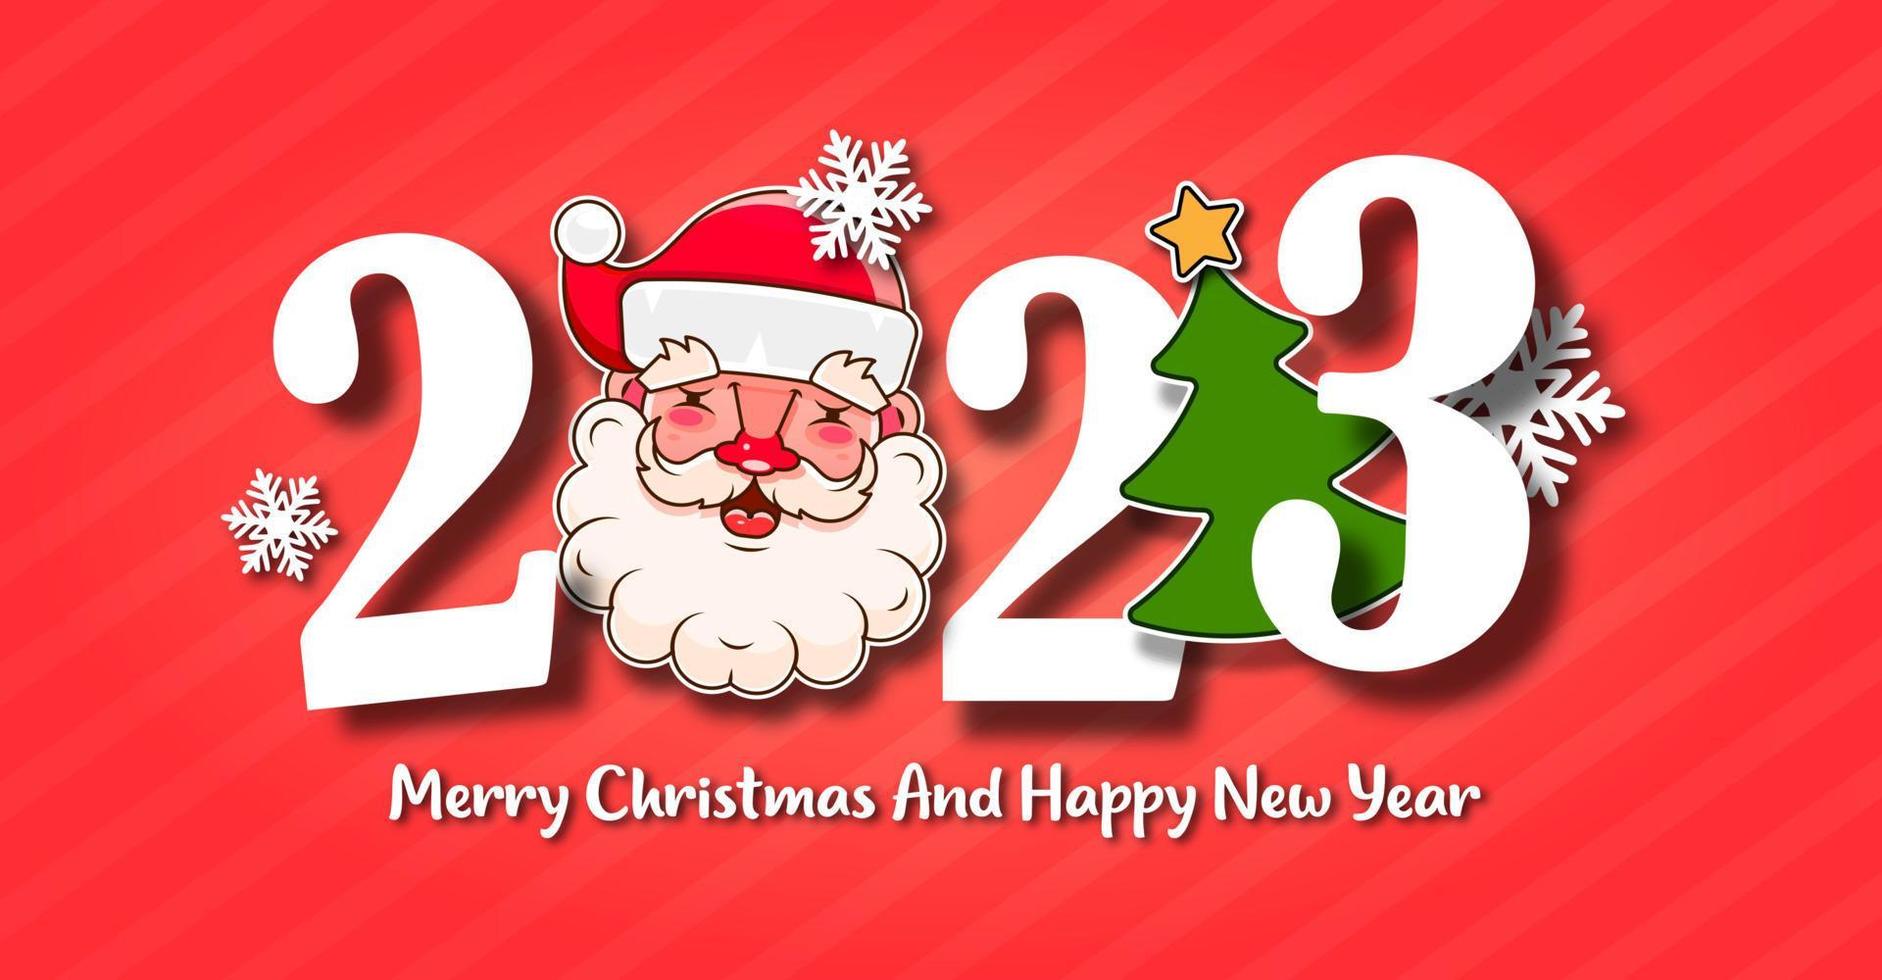 I Wish You A Merry Christmas And Happy New Year Vintage Background ...